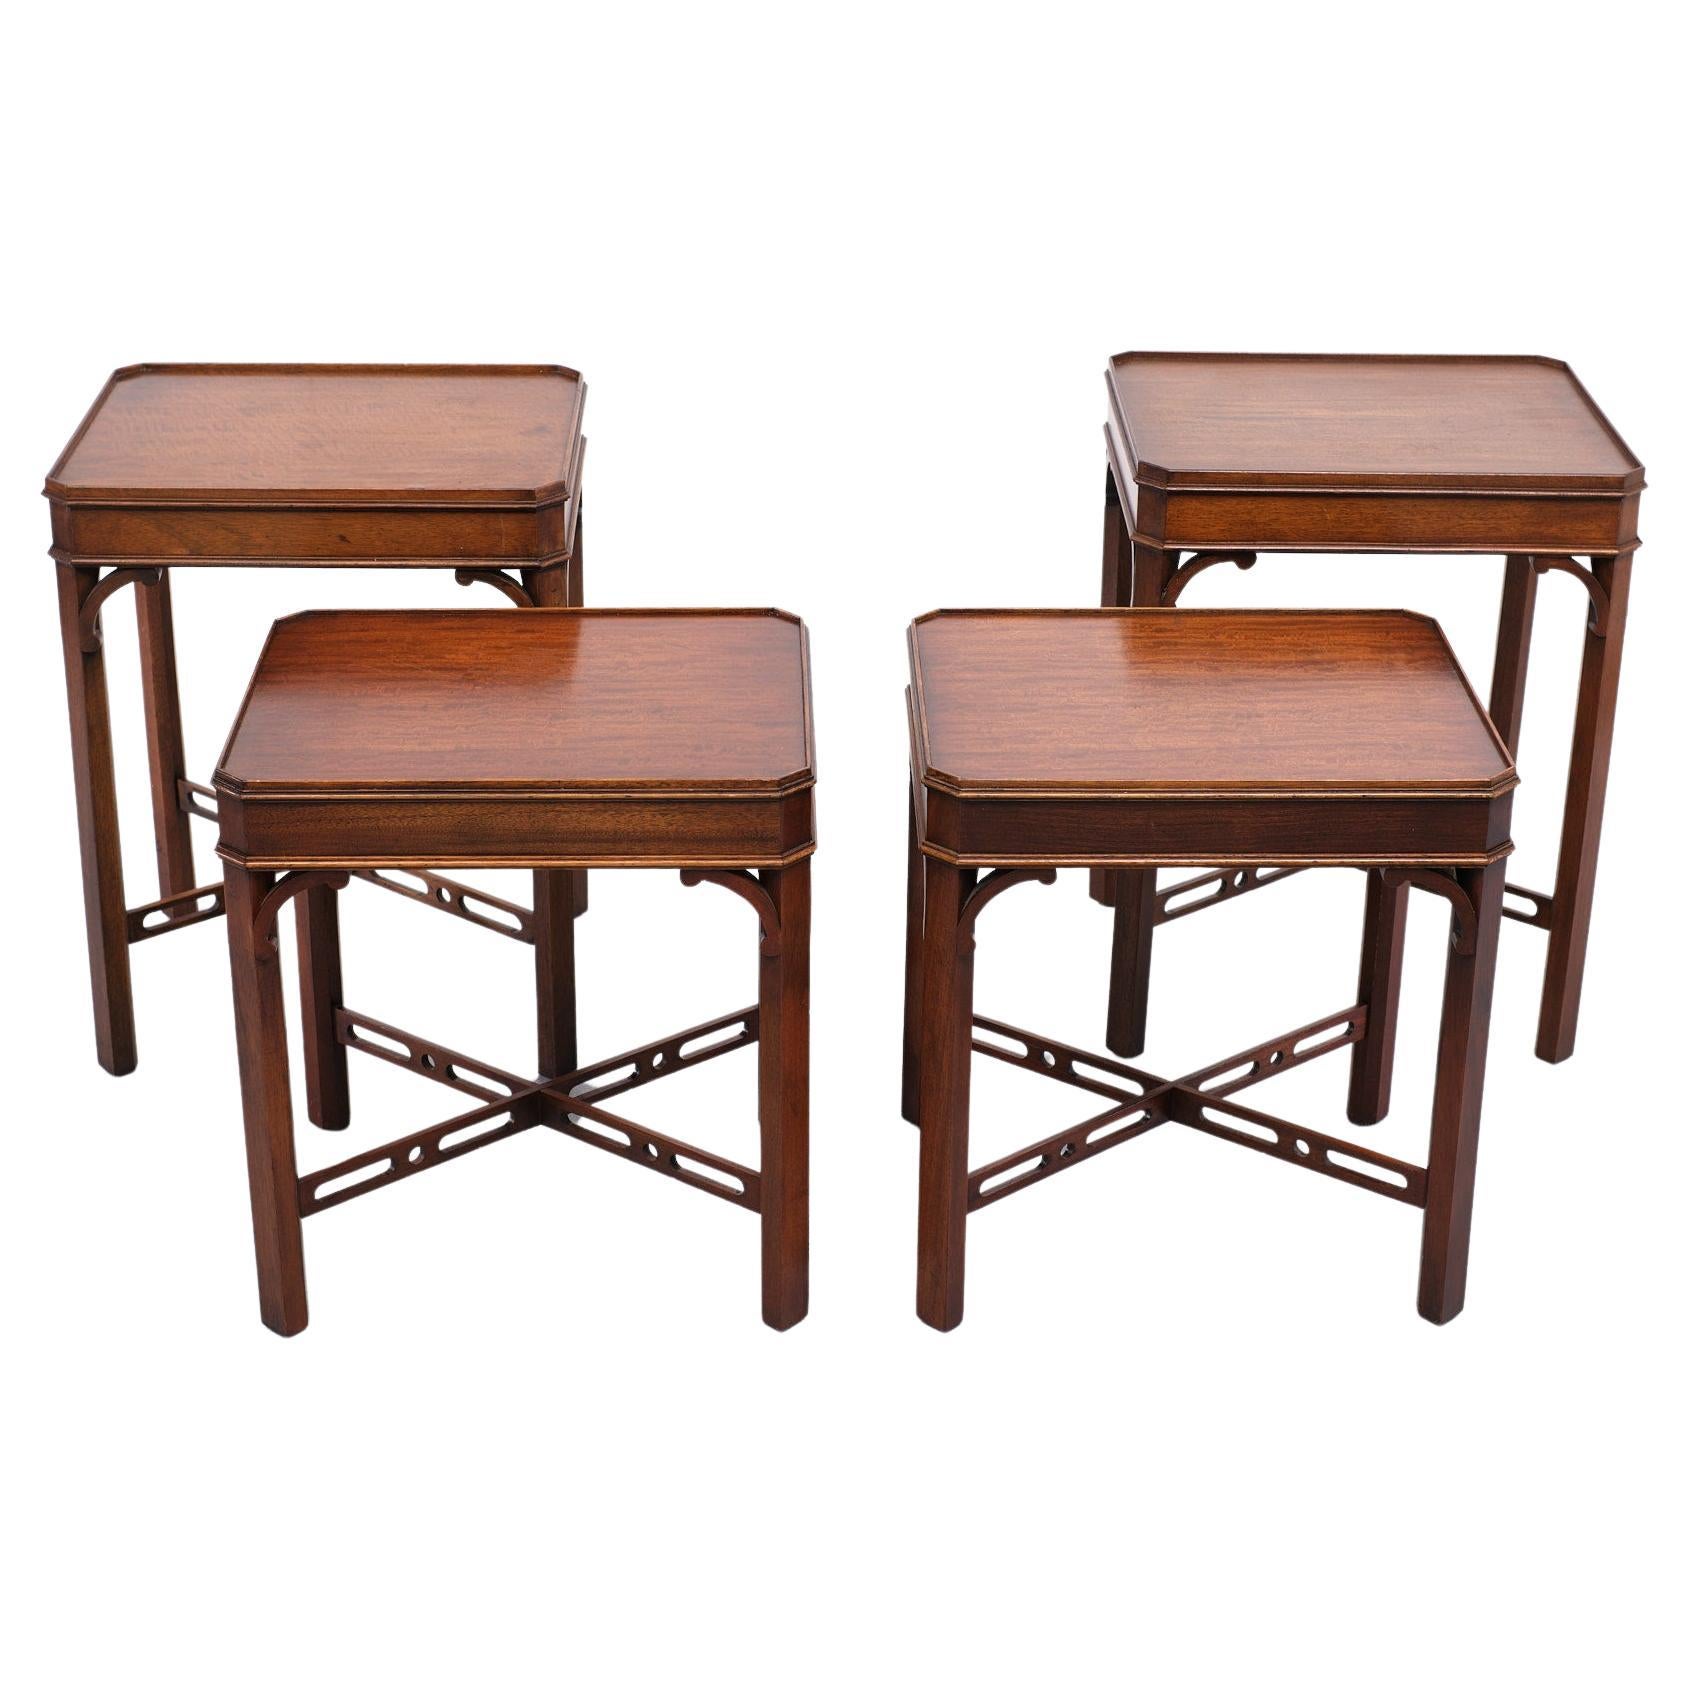 Bevan Funnell Mahogany Side Tables Georgian Revival England, 1960s